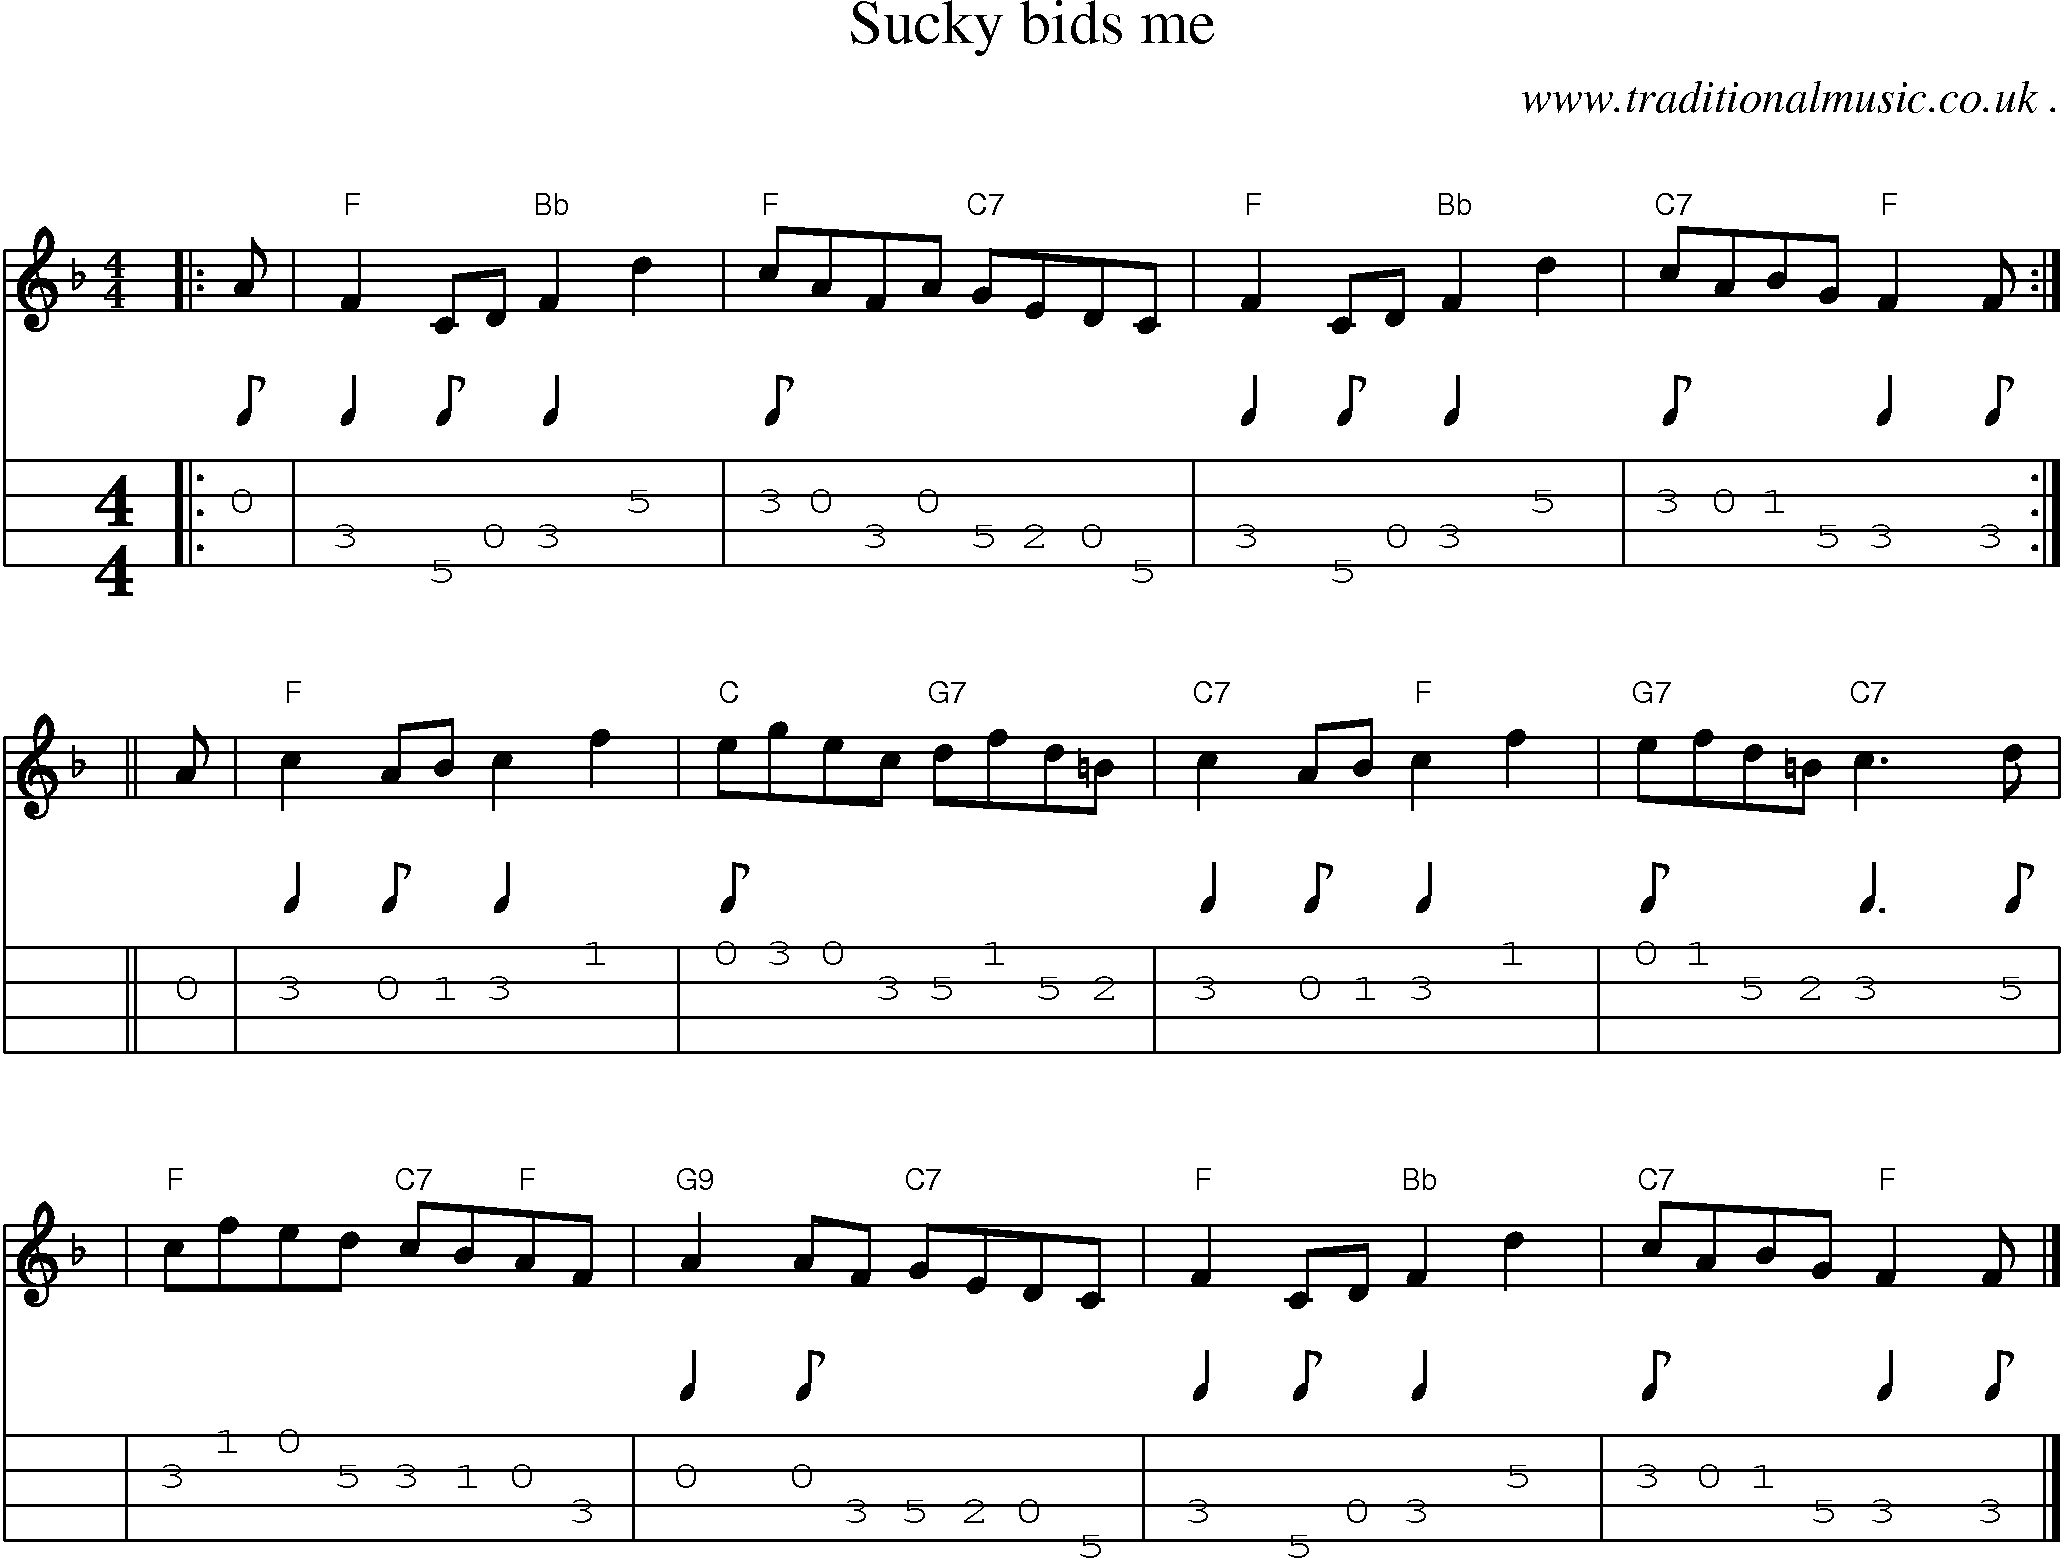 Sheet-music  score, Chords and Mandolin Tabs for Sucky Bids Me